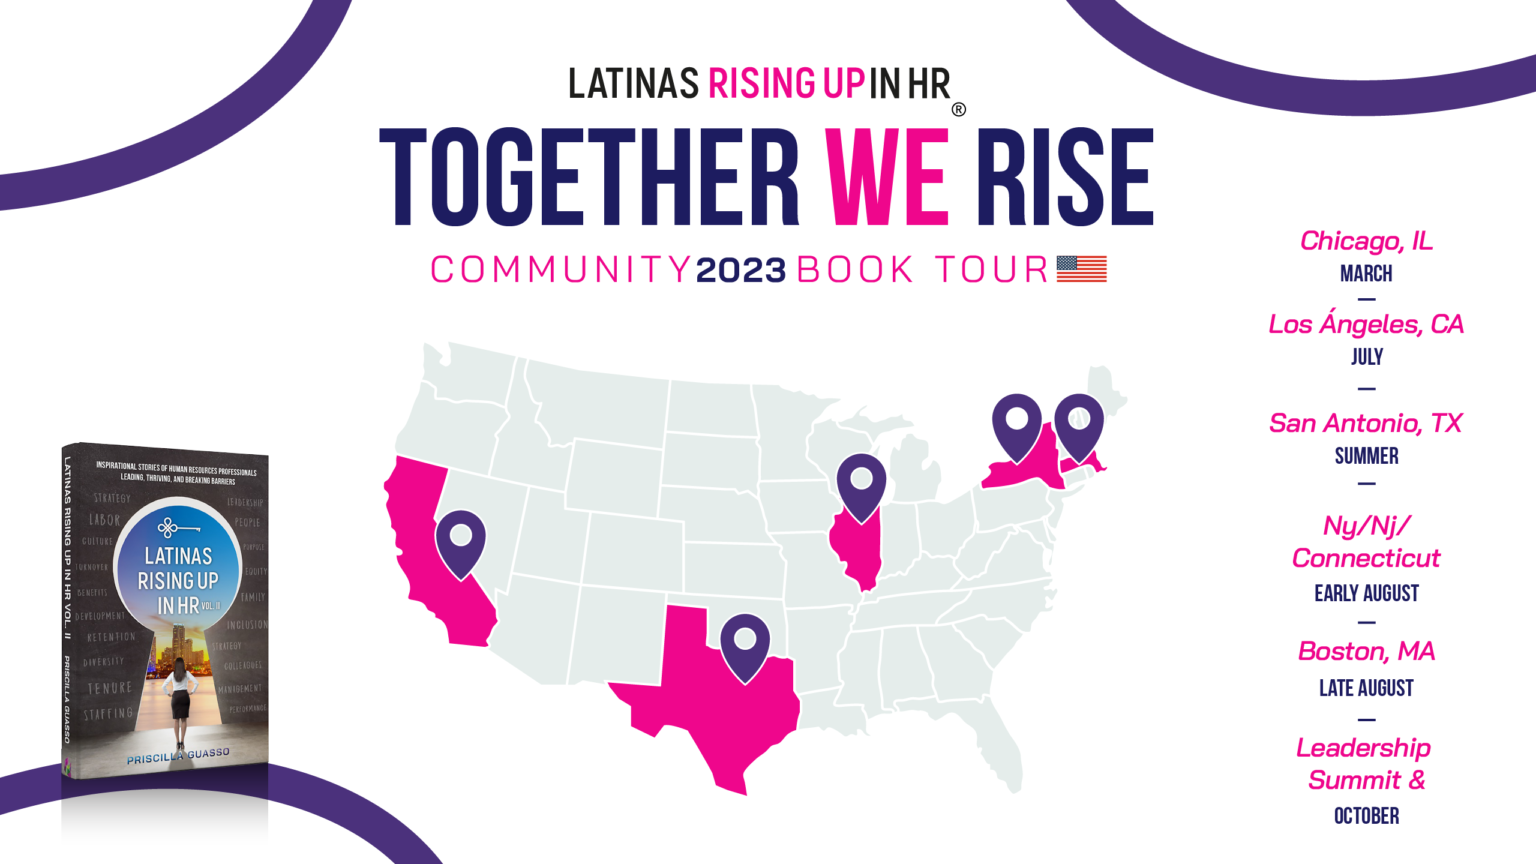 Together We Rise: Community 2023 Book Tour - Latinas Rising Up in HR